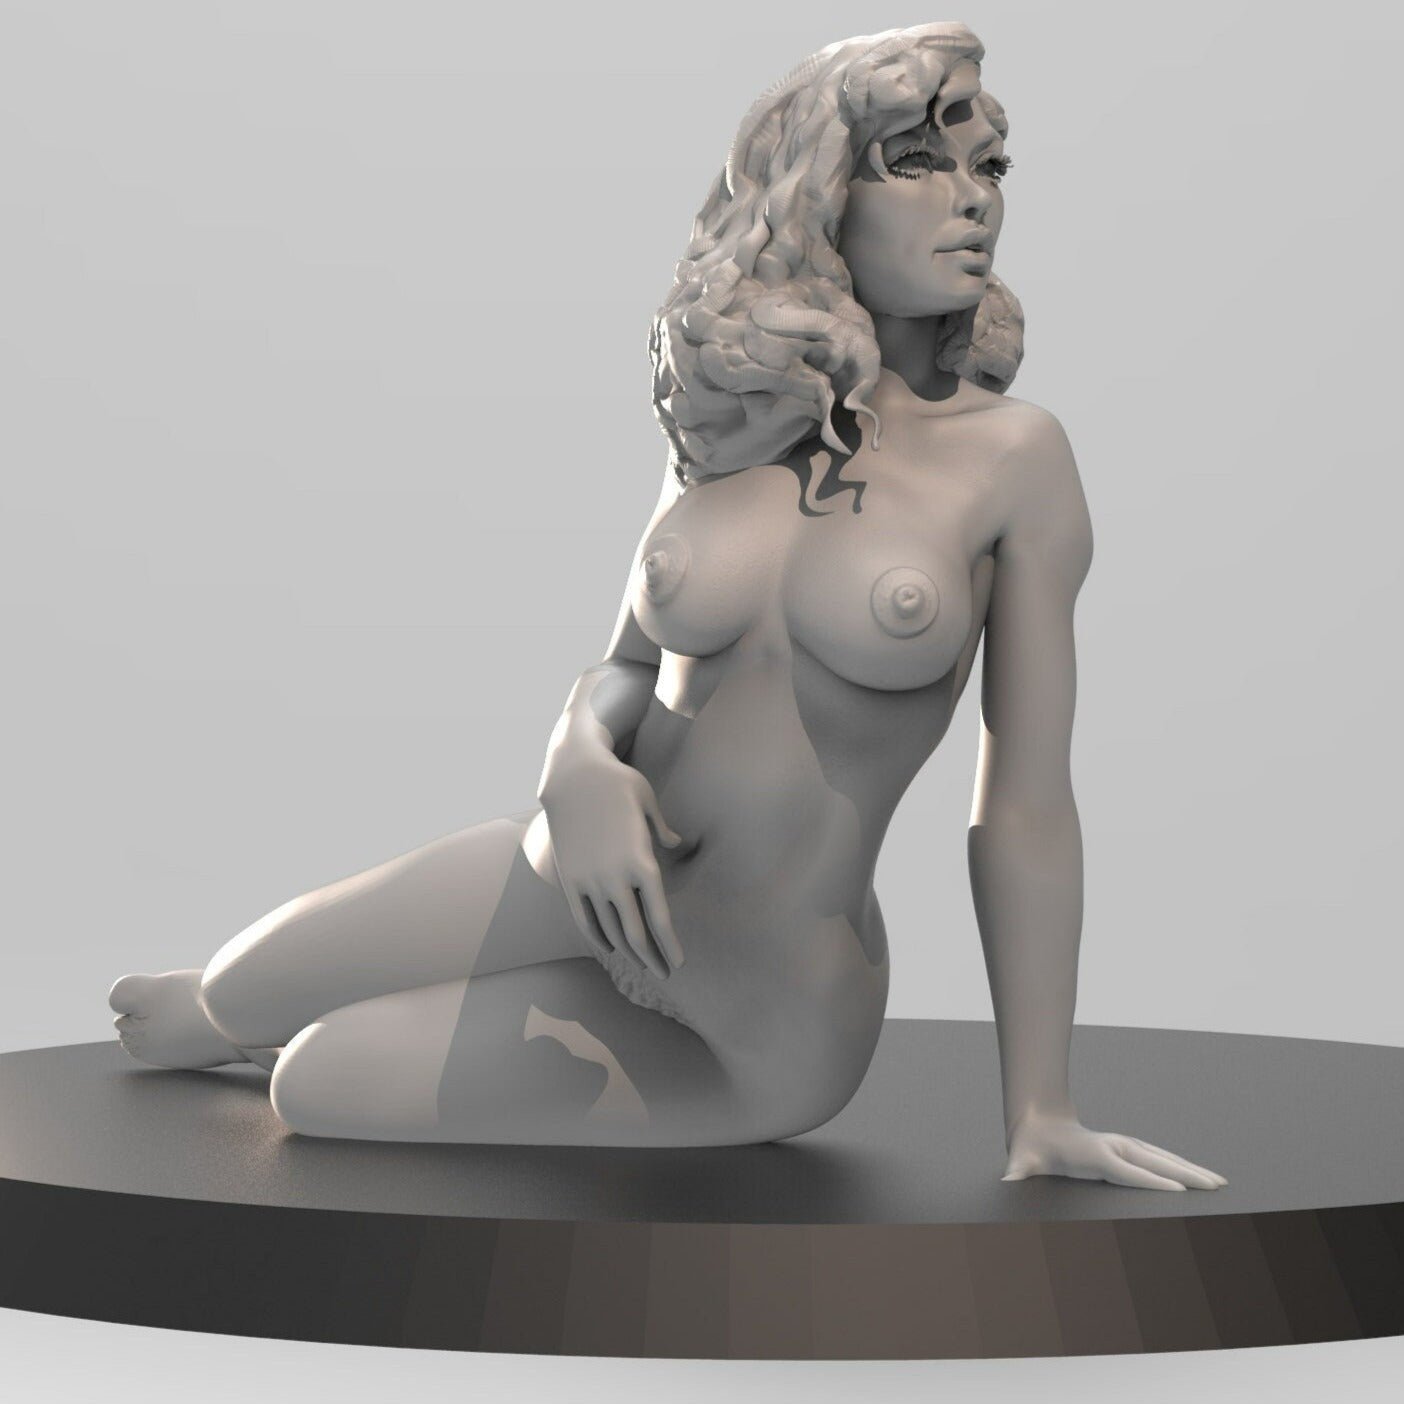 Pinup Girl Vol.1 MEGAN| 35mm / 75mm | 3D Printed | Unpainted | Sexy | Pinup | NSFW Version | Figurine | Figure | Miniature | Sexy |